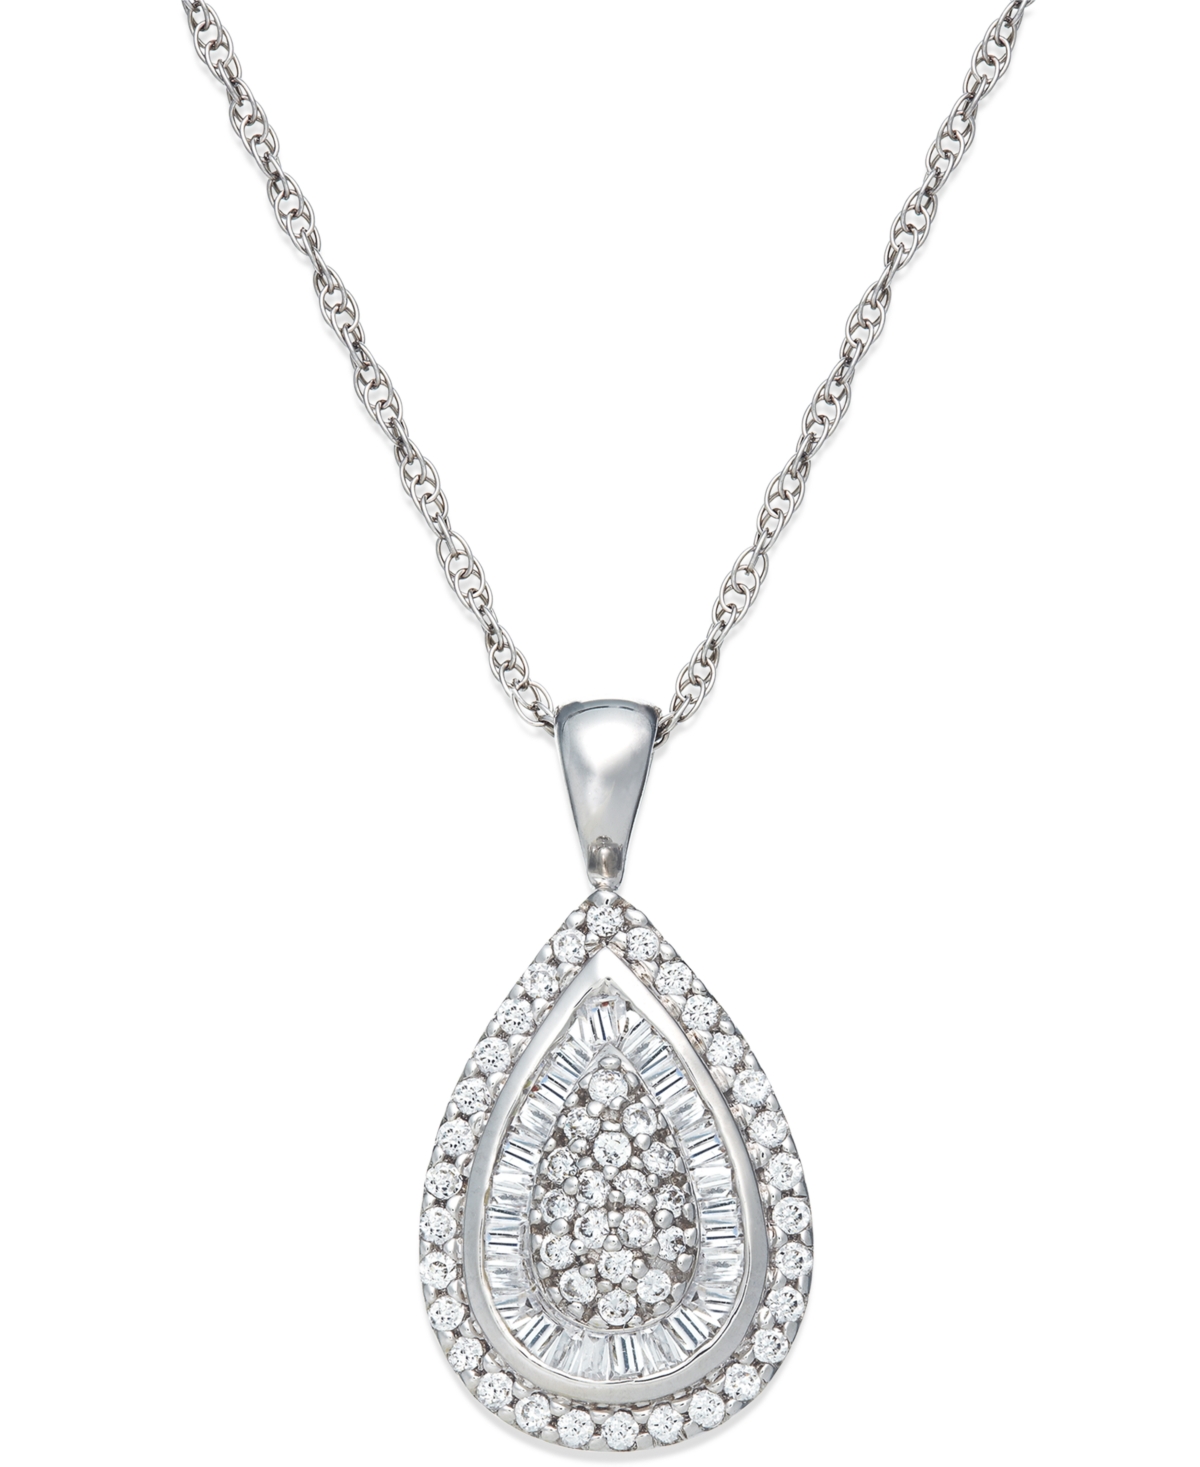 Diamond Teardrop Pendant Necklace (1/2 ct. t.w.) in 14k White, Yellow or Rose Gold, Created for Macy's - Yellow Gold